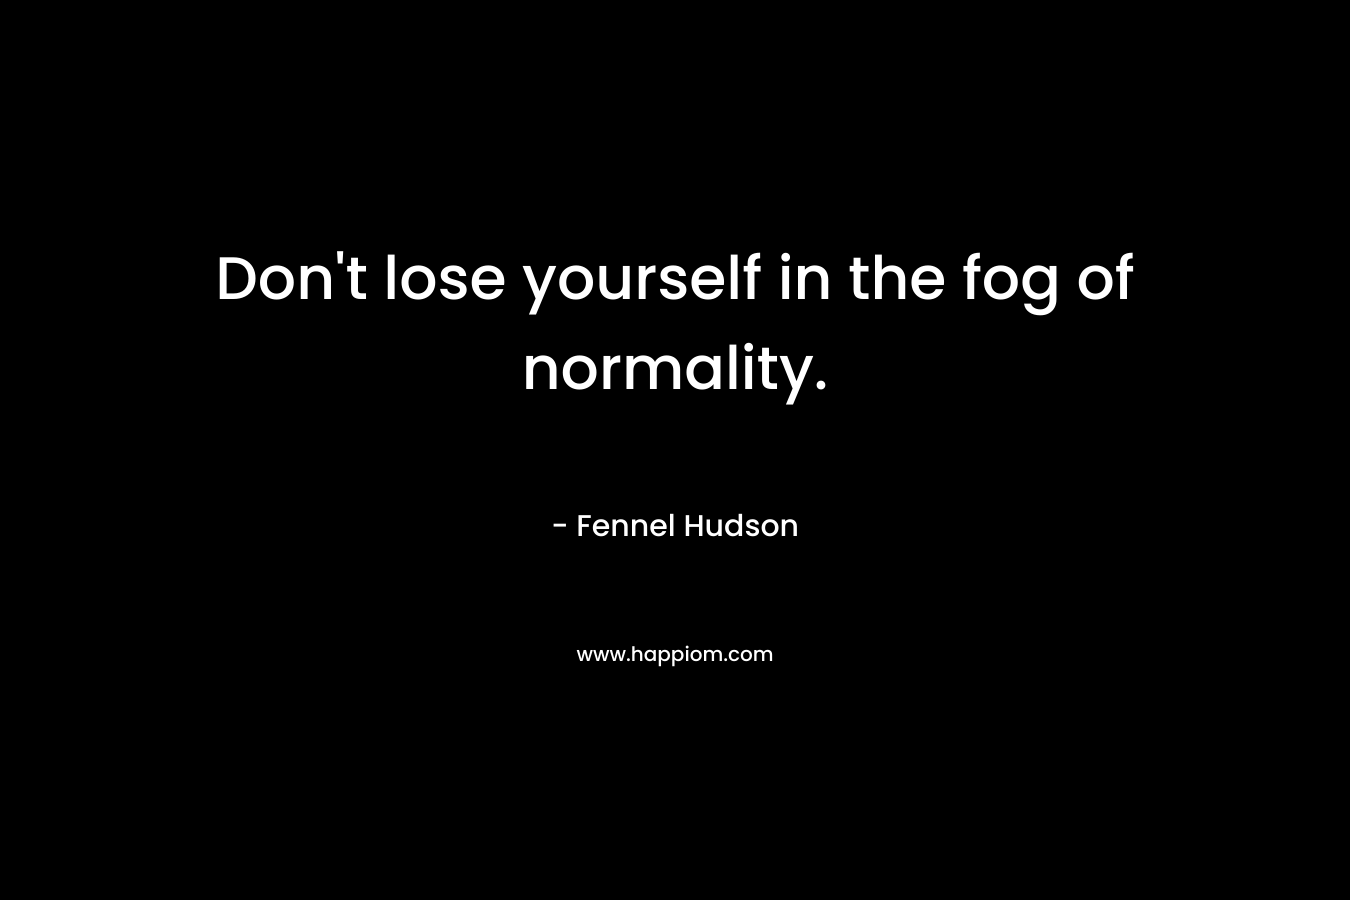 Don't lose yourself in the fog of normality.